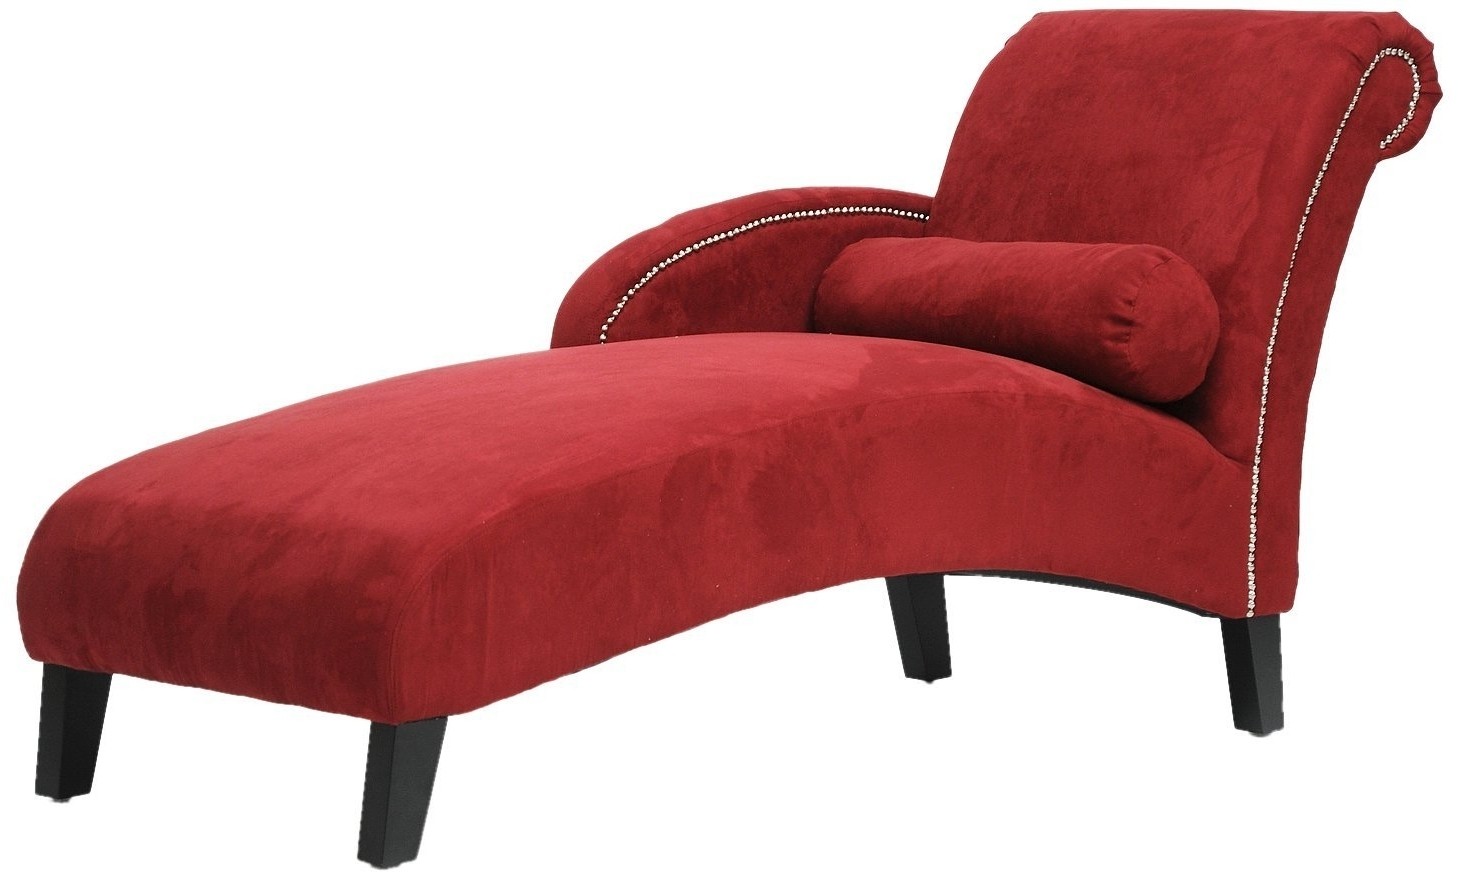 15 best red chaise lounges 3